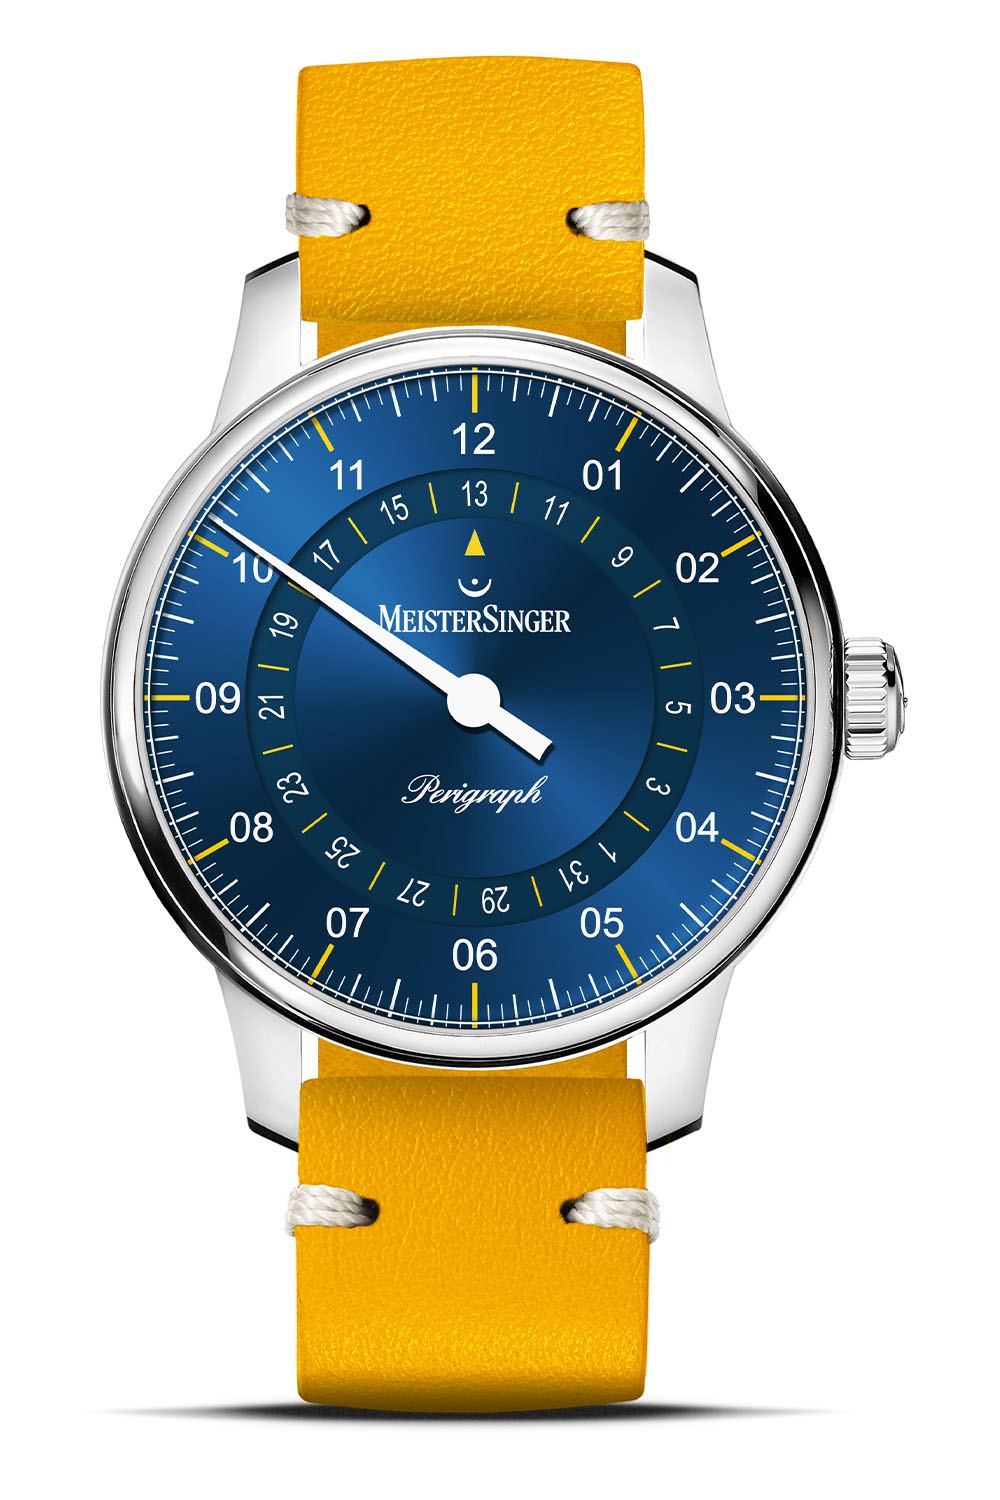 MeisterSinger Perigraph Special Edition Models 2023 - 38mm and 43mm blue and yellow - 6